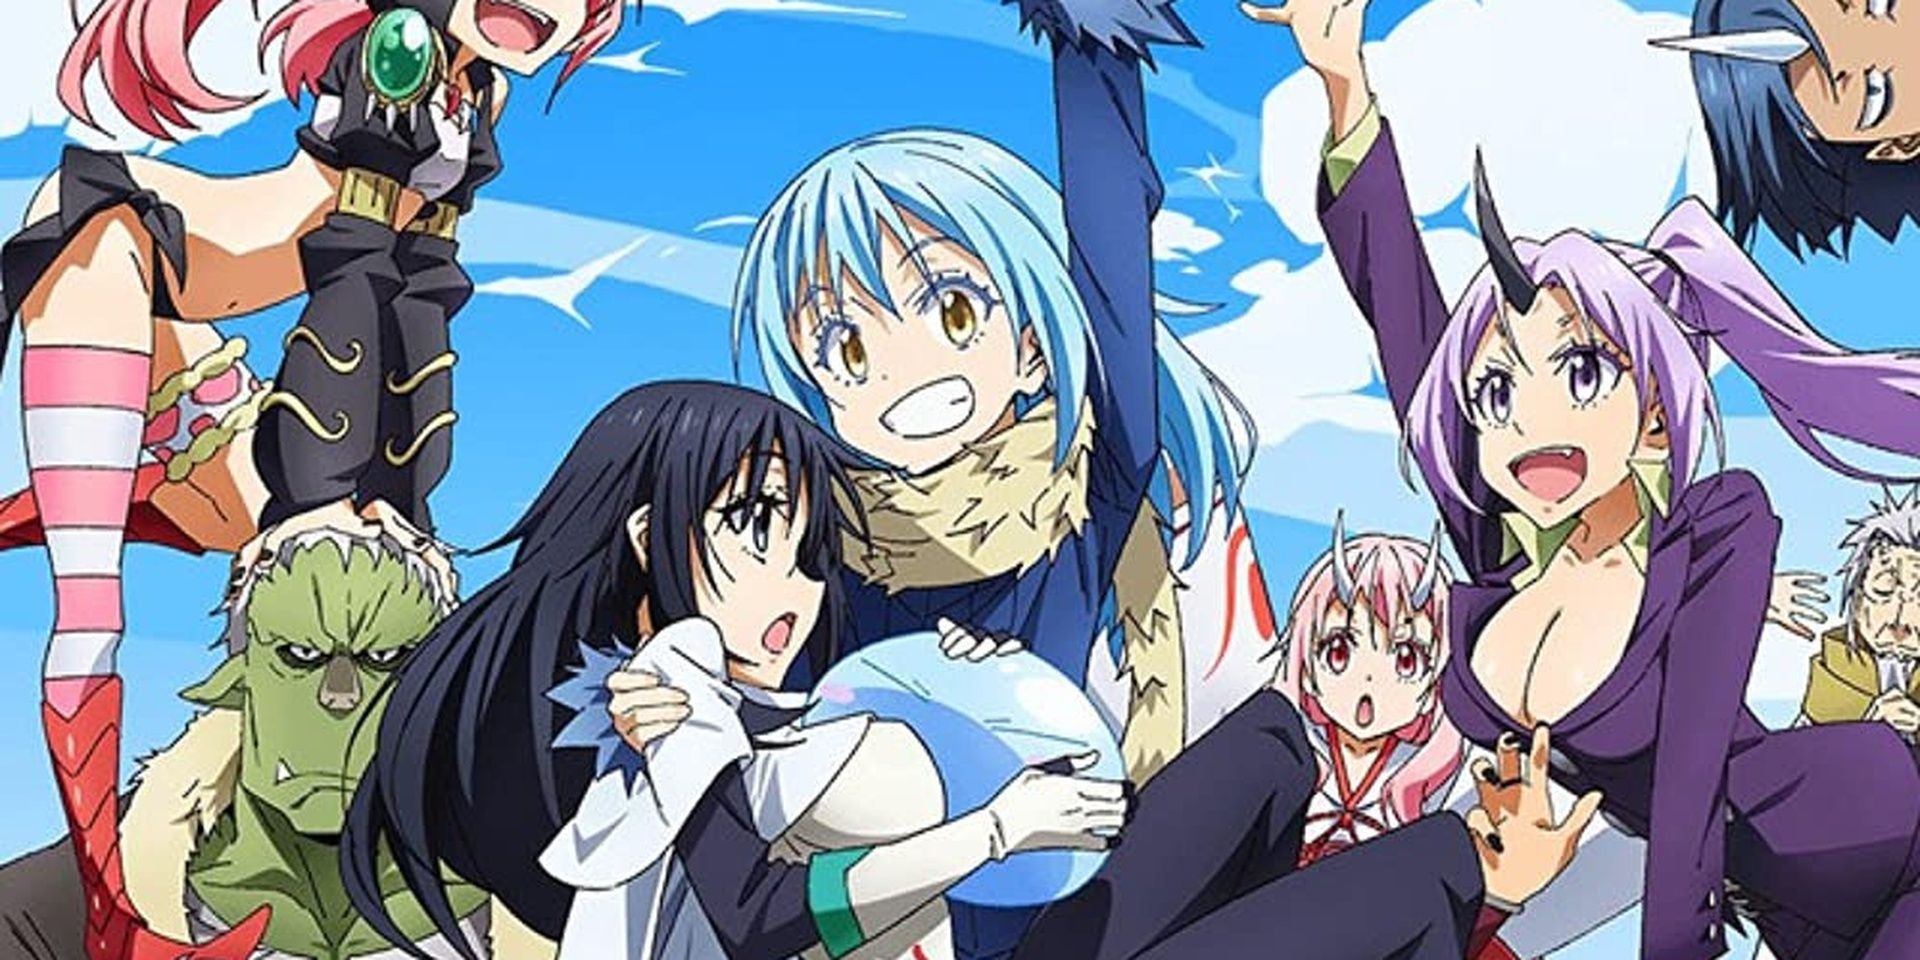 That Time I Got Reincarnated as a Slime Season 3, Trailer, Latest News, & Everything We Know so Far